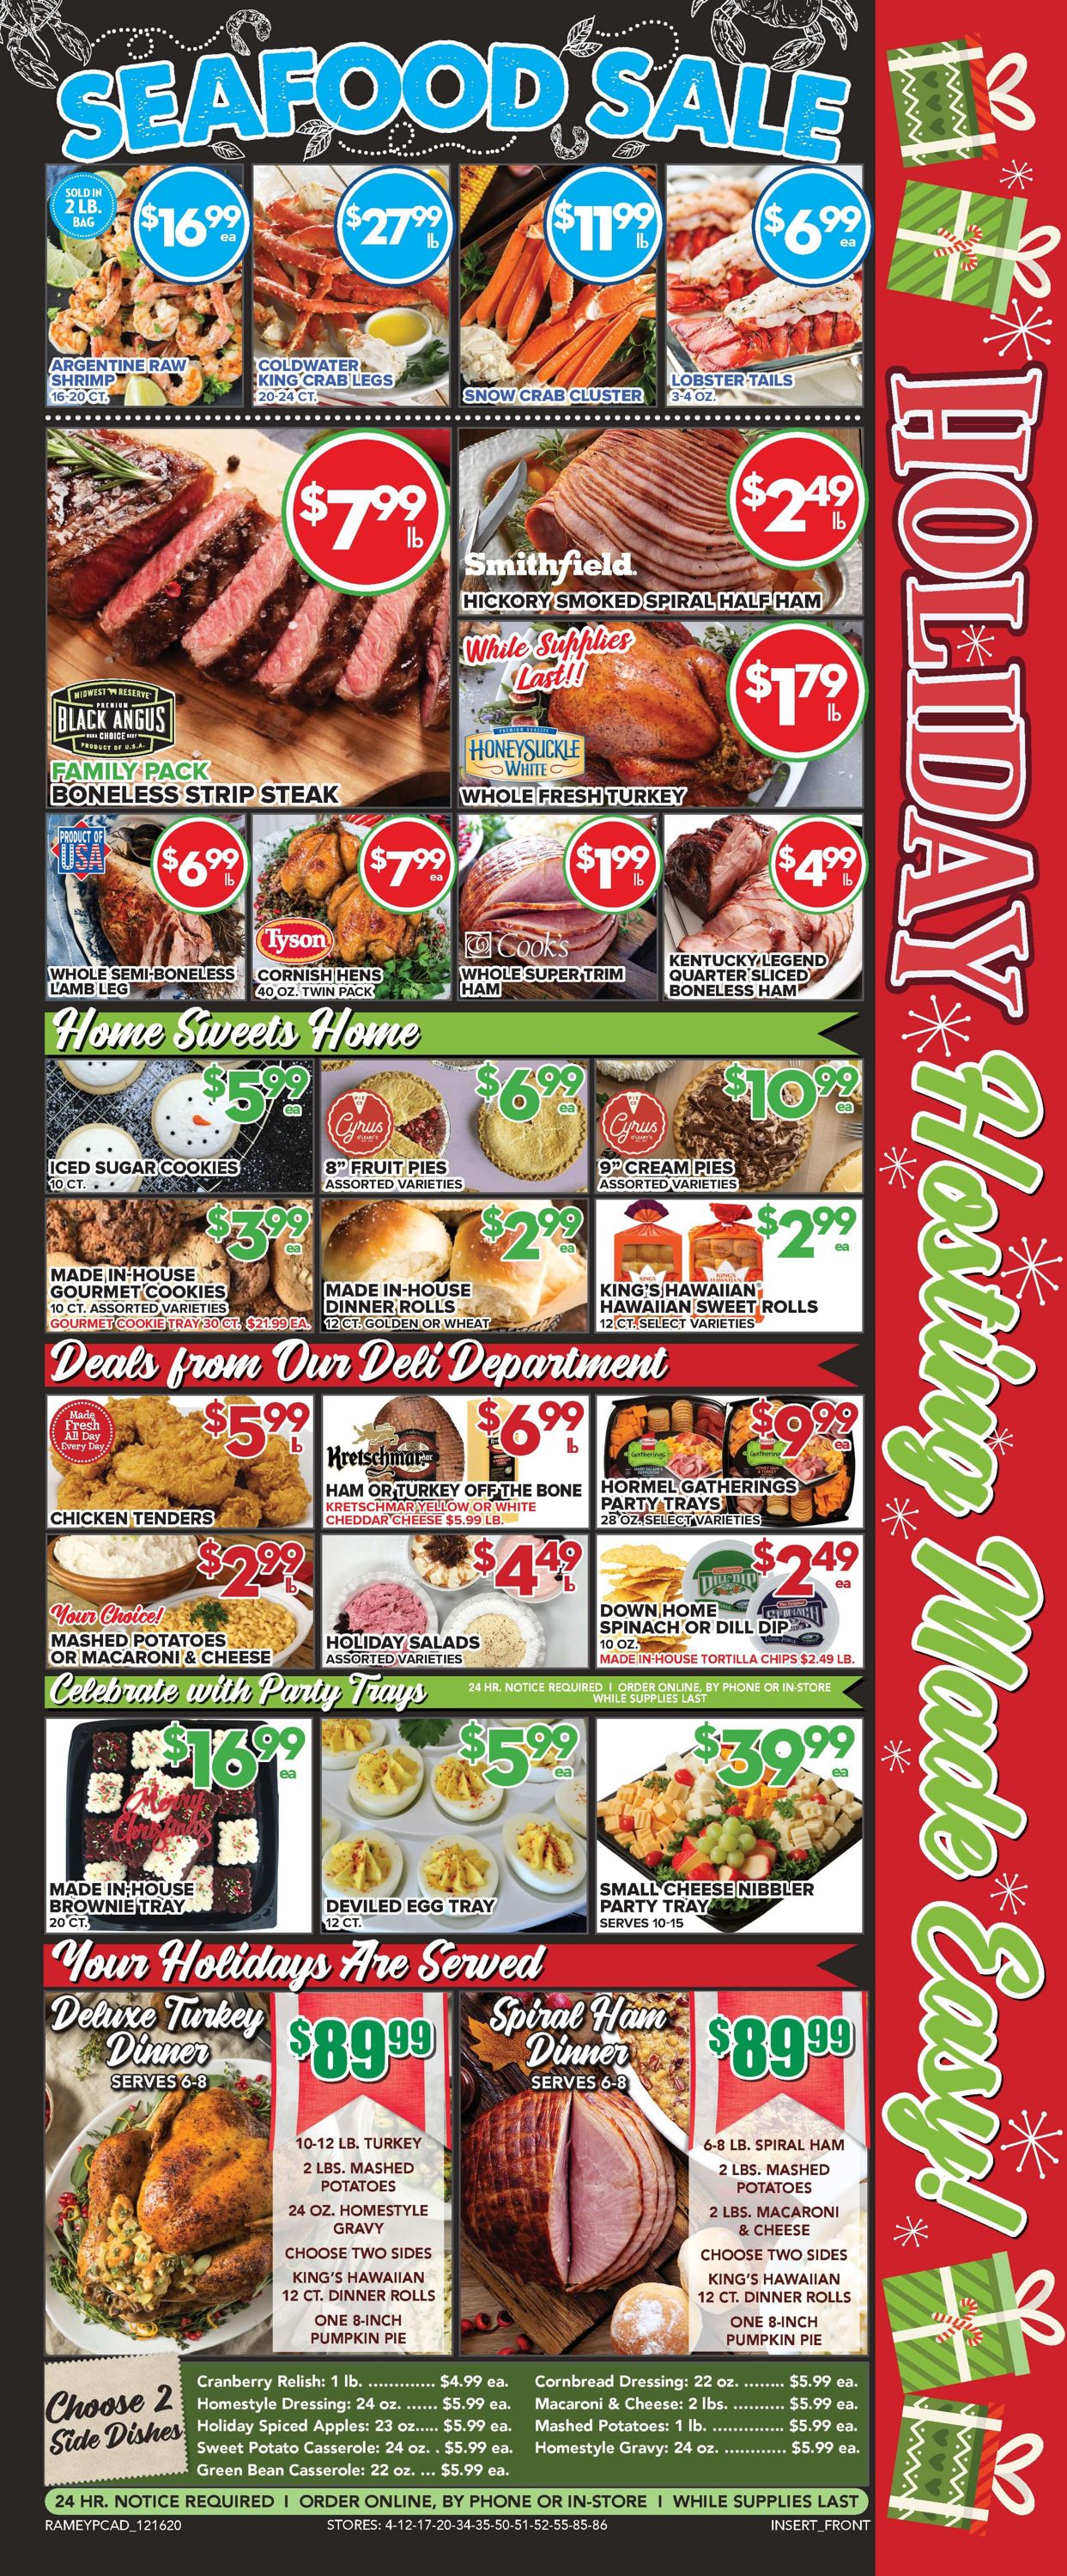 Price Cutter Christmas Ad 2020 Weekly Ad Circular - valid 12/16-12/25/2020 (Page 3)